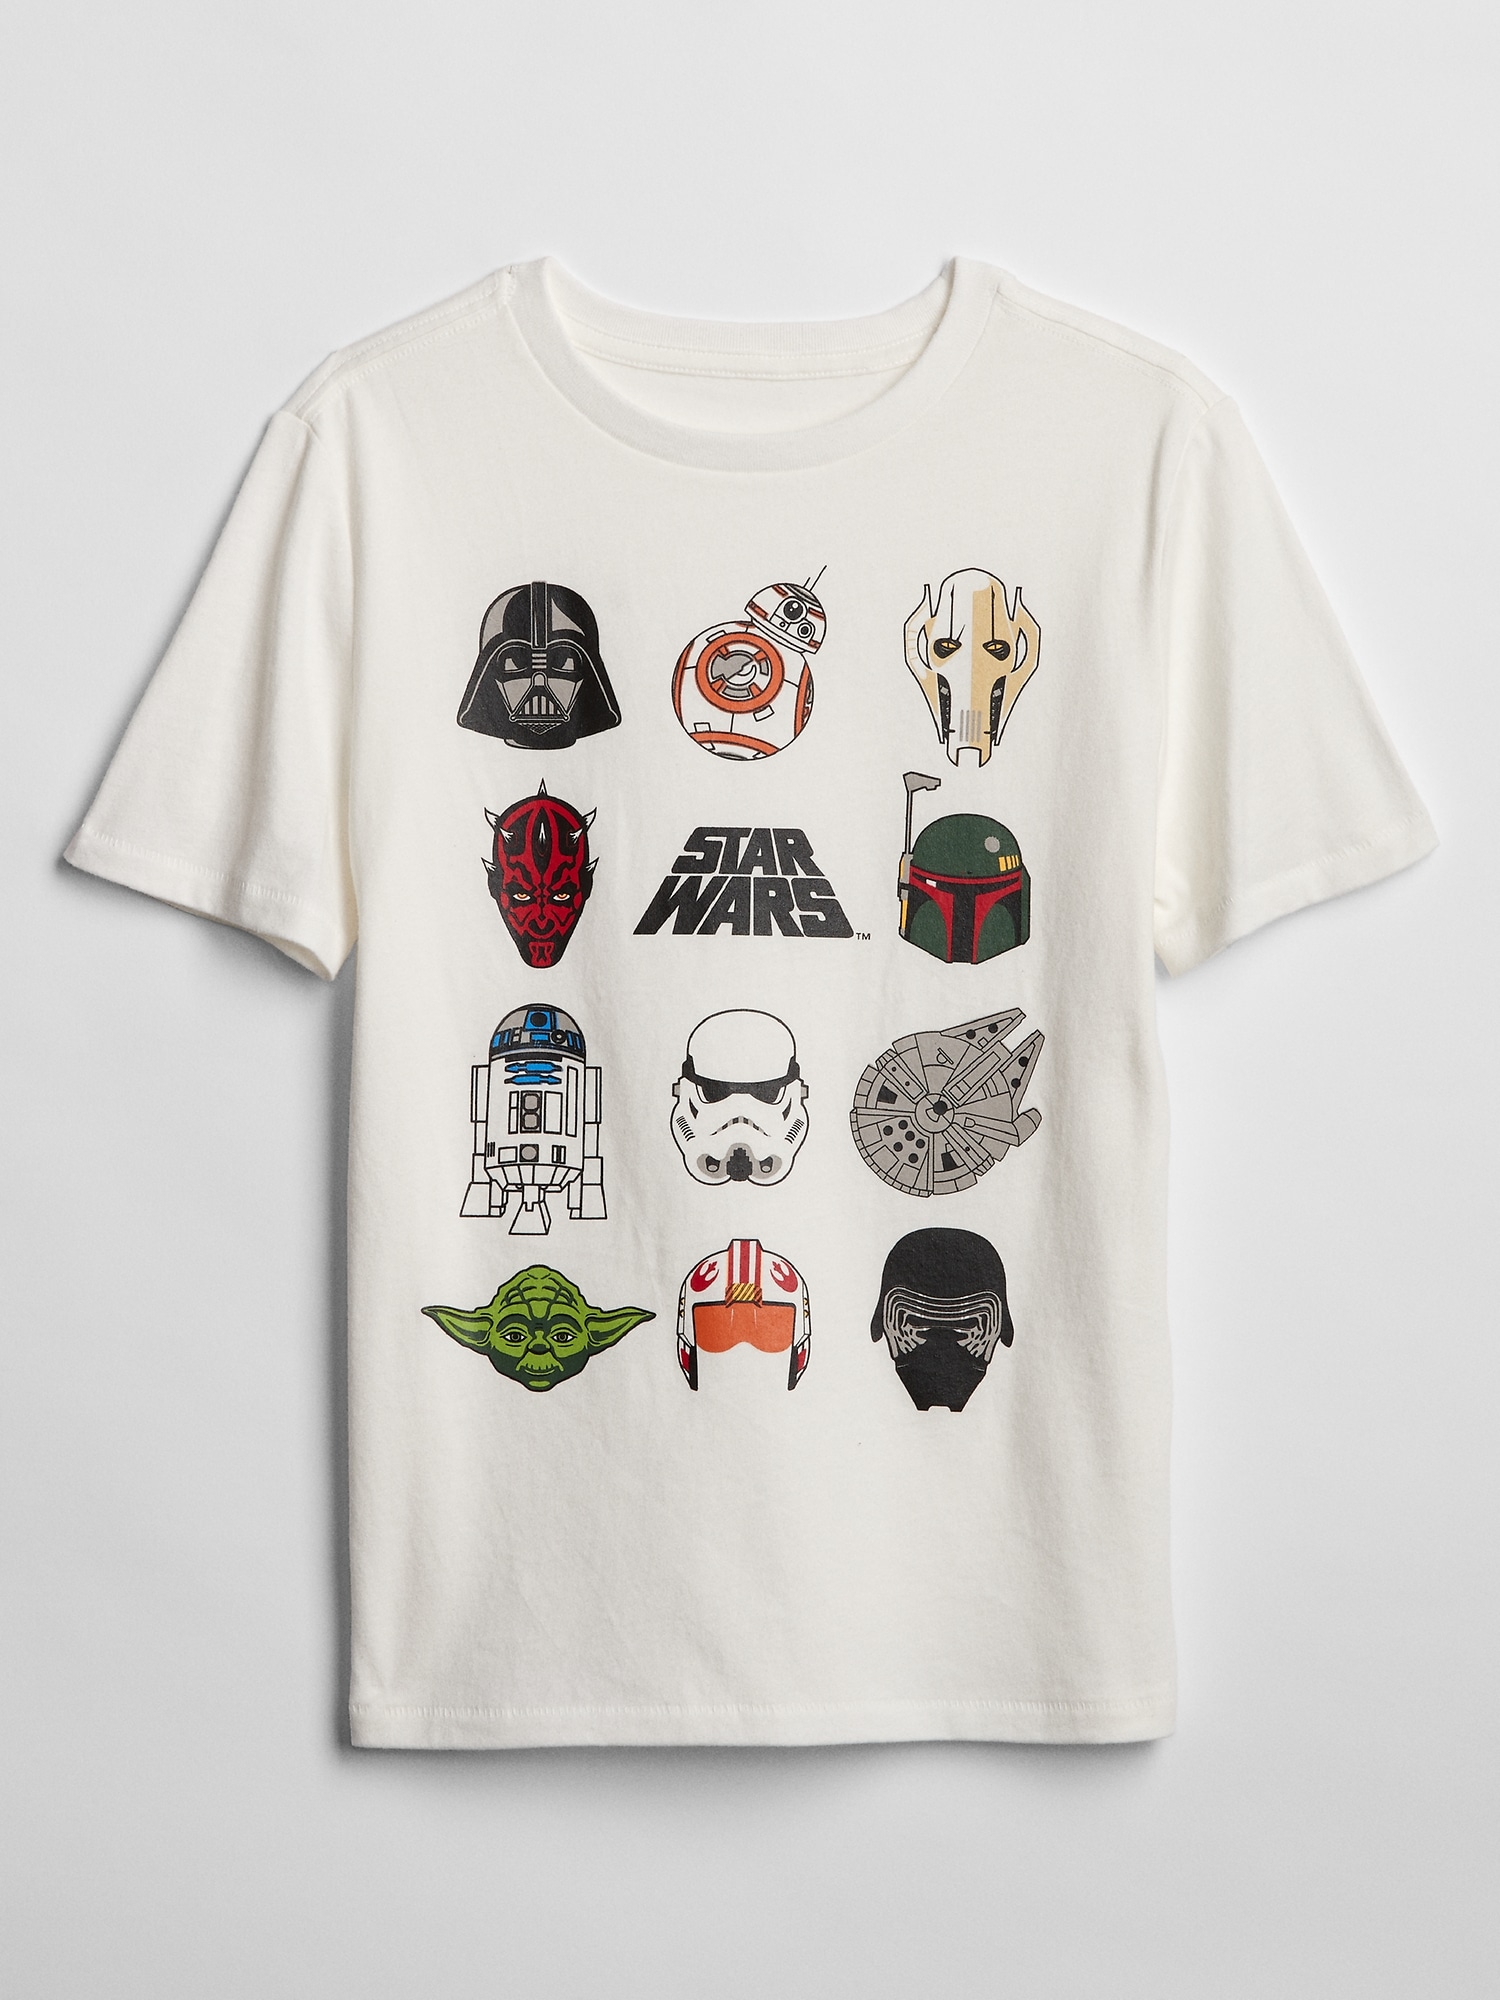 Gap Factory Gap| Star Wars Graphic T-Shirt New Off White Size M